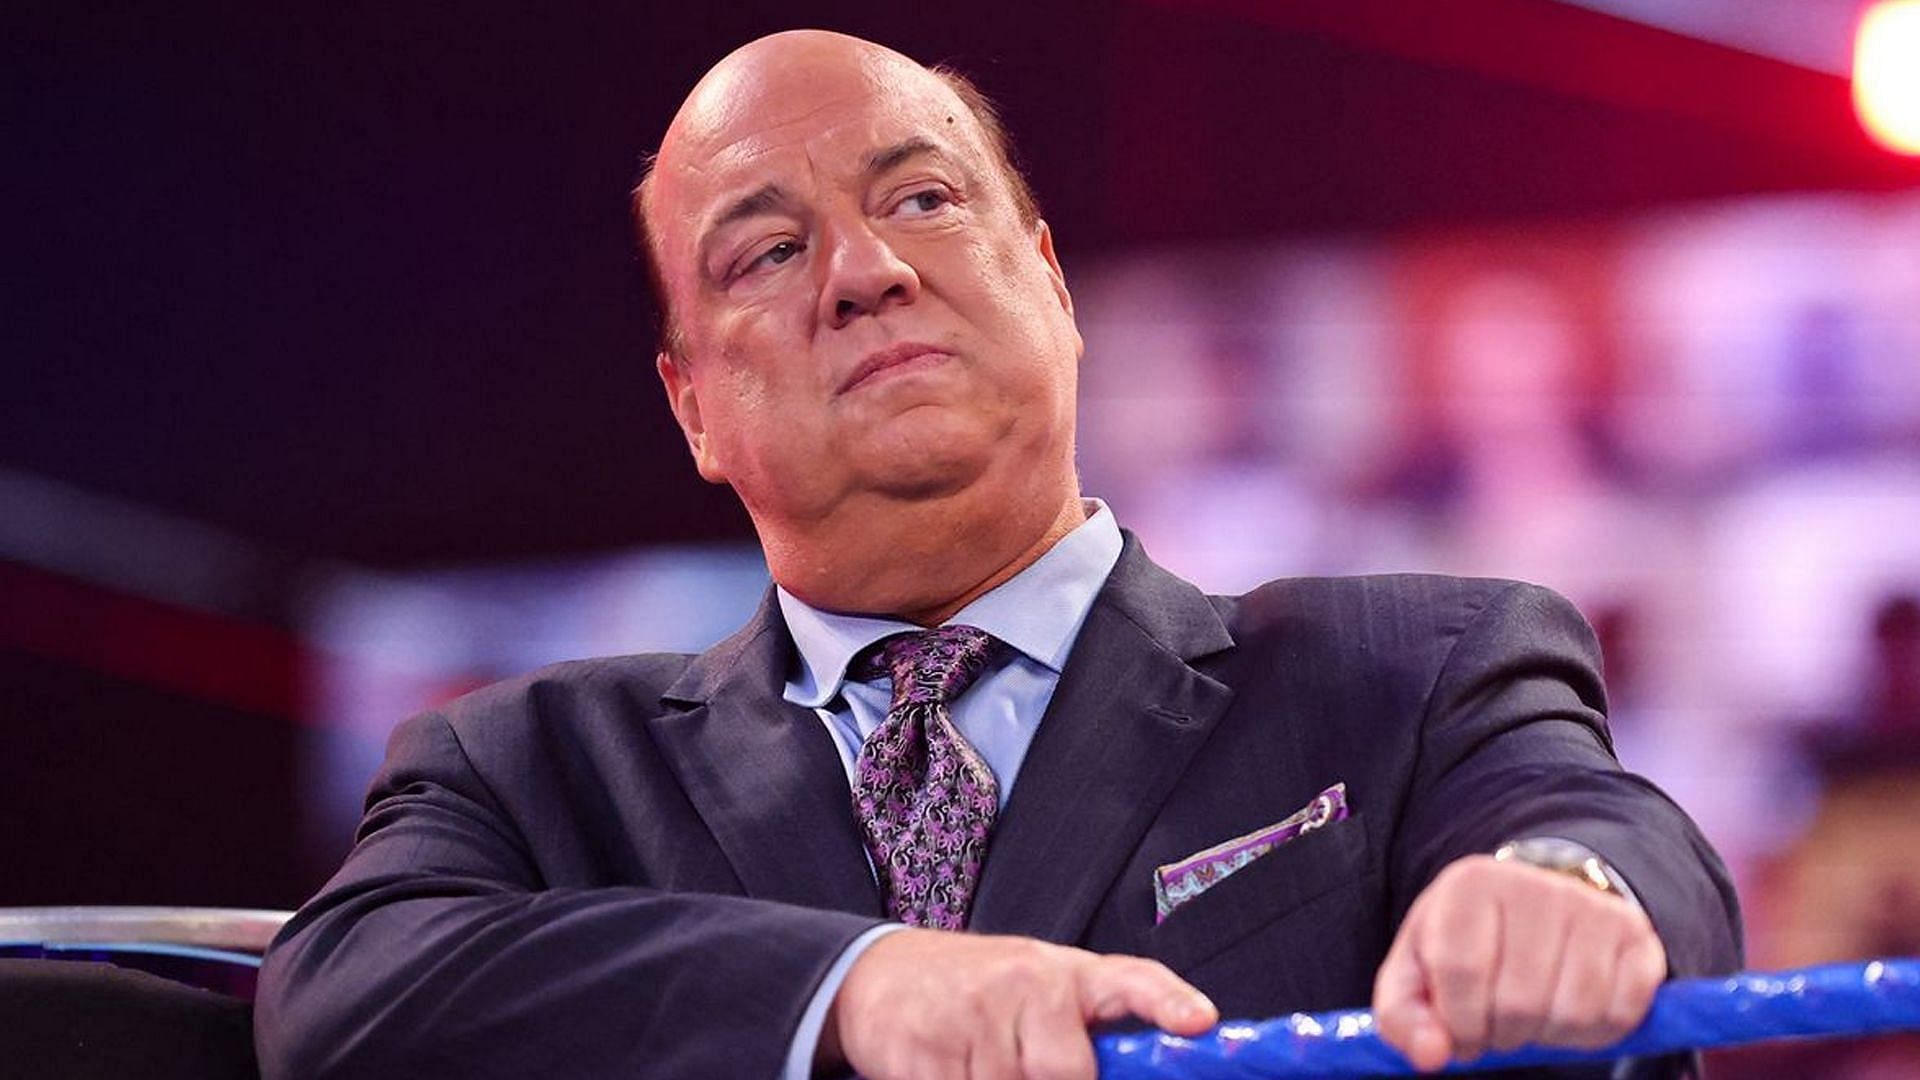 Did Heyman know he was going to betray Brock Lesnar ahead of time?